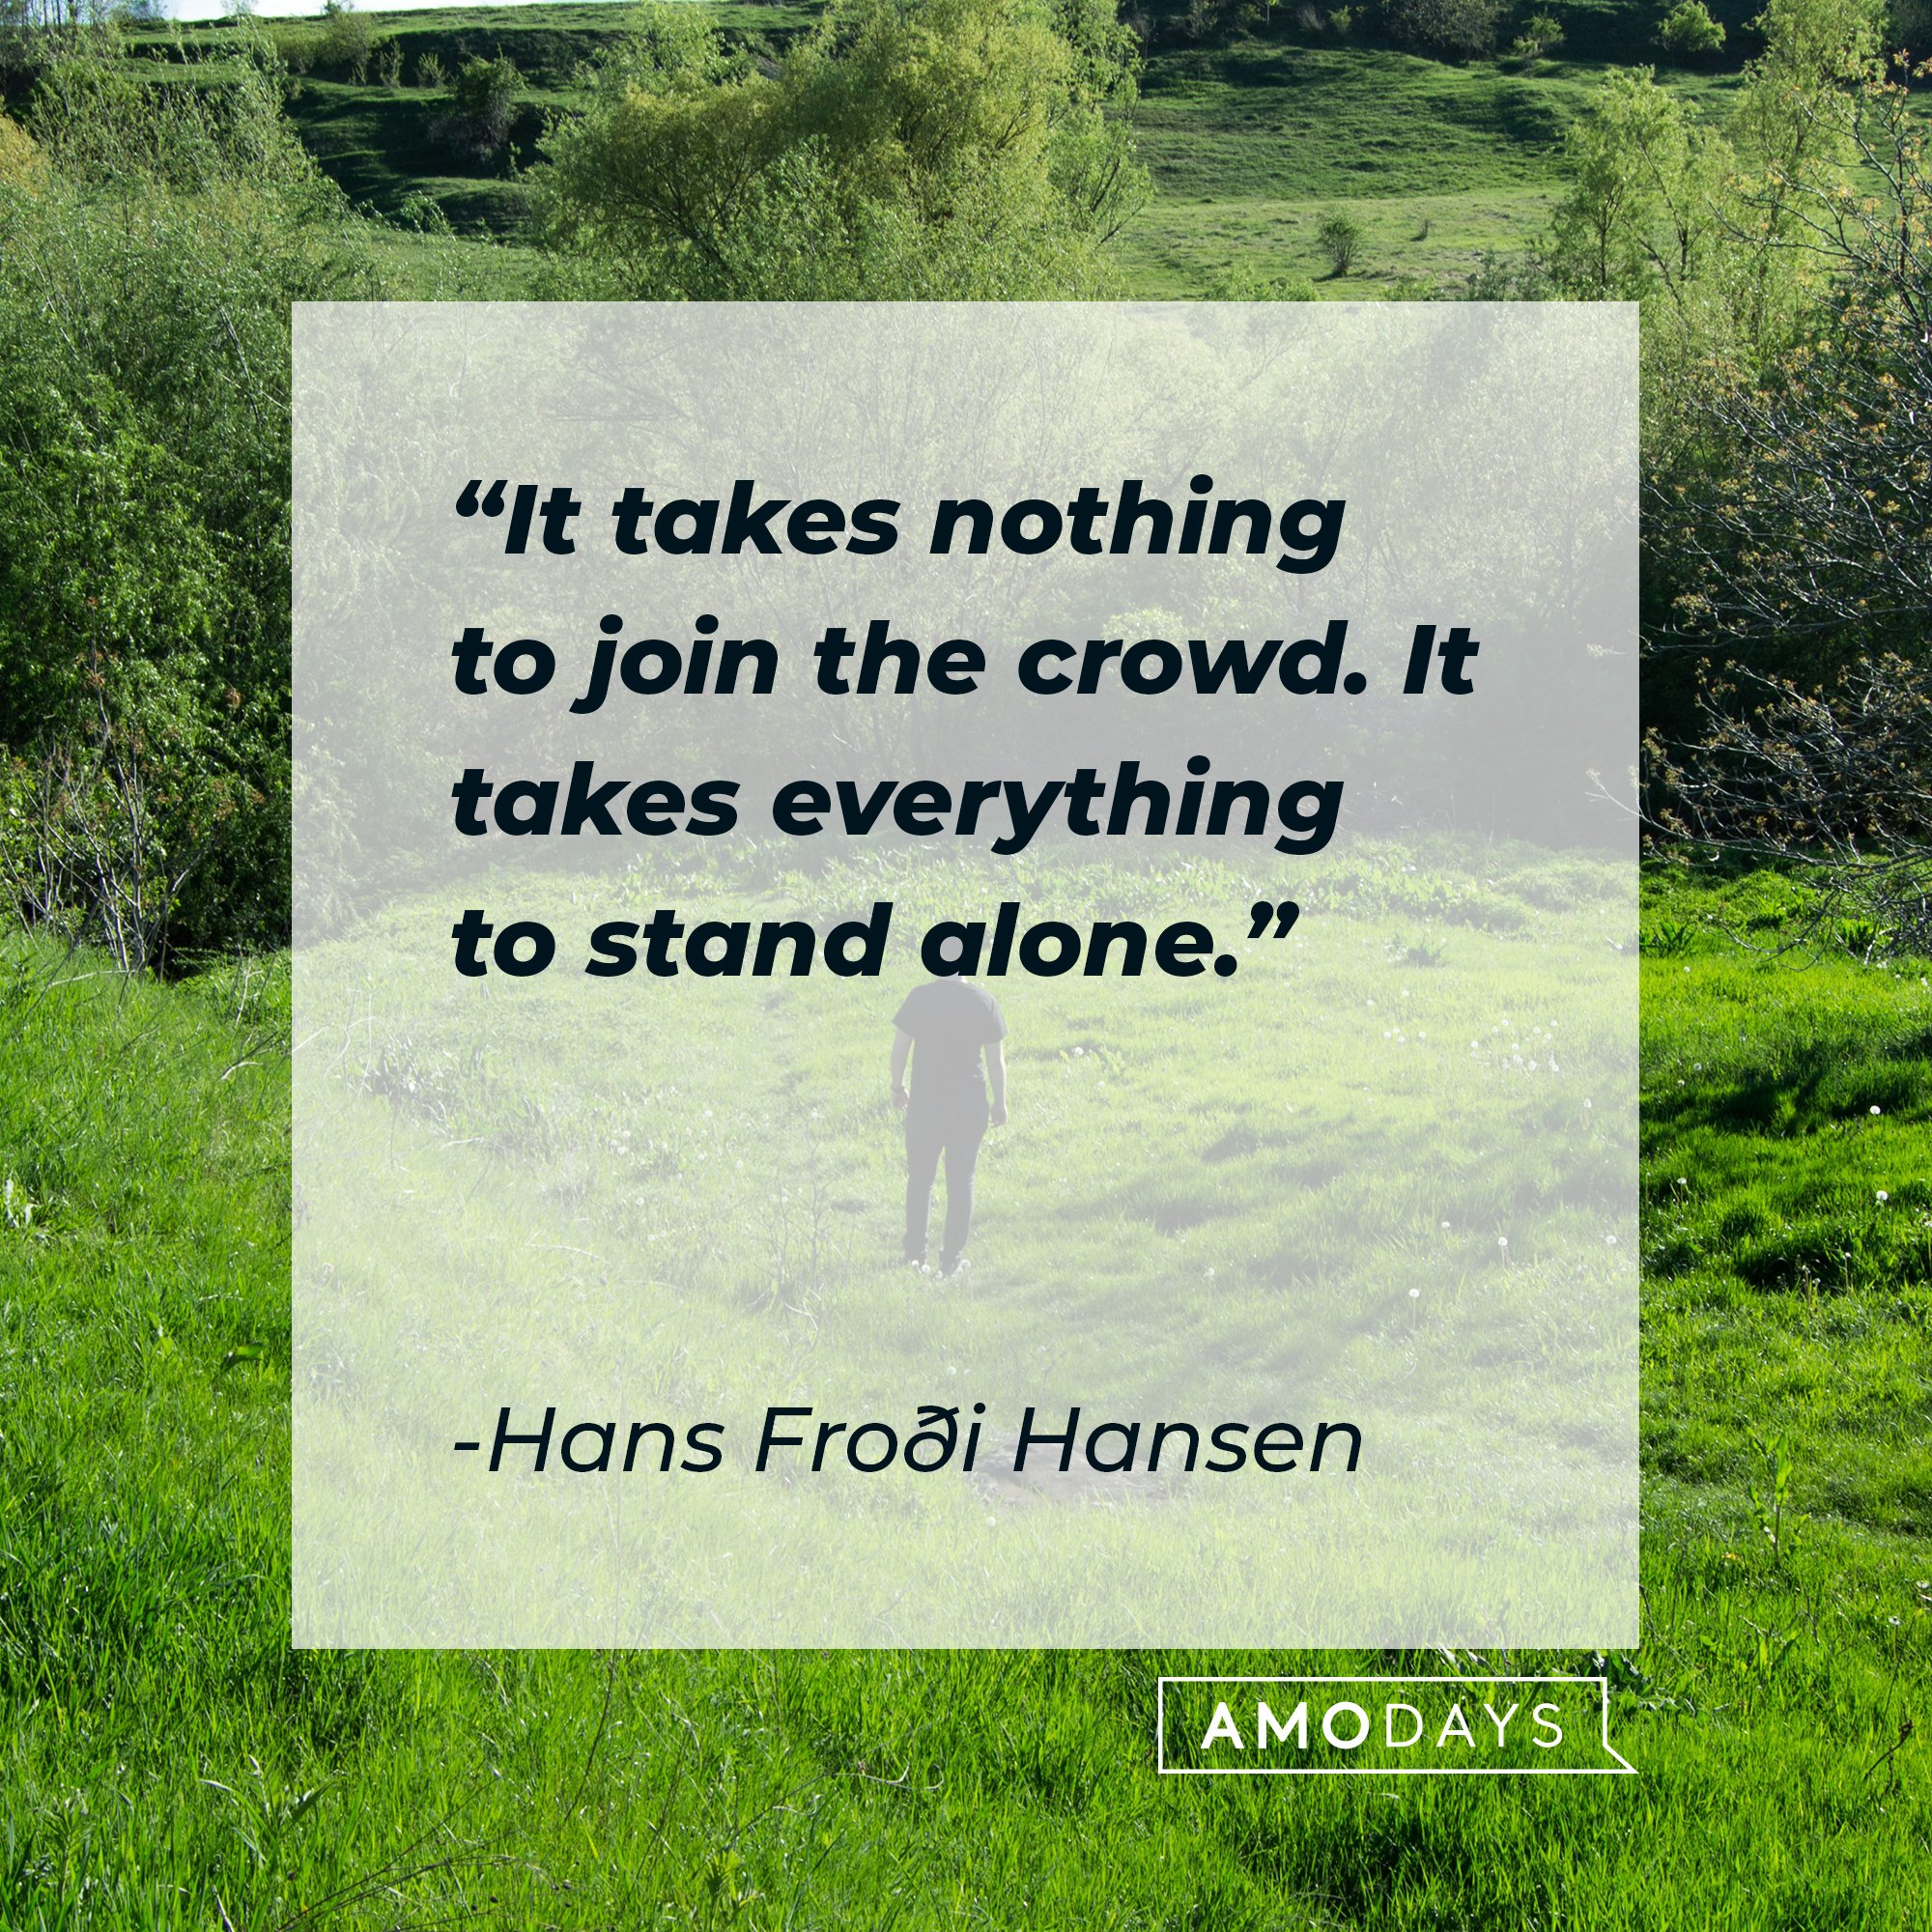 Hans Froði Hansen’s quote: "It takes nothing to join the crowd. It takes everything to stand alone." | Image: AmoDays